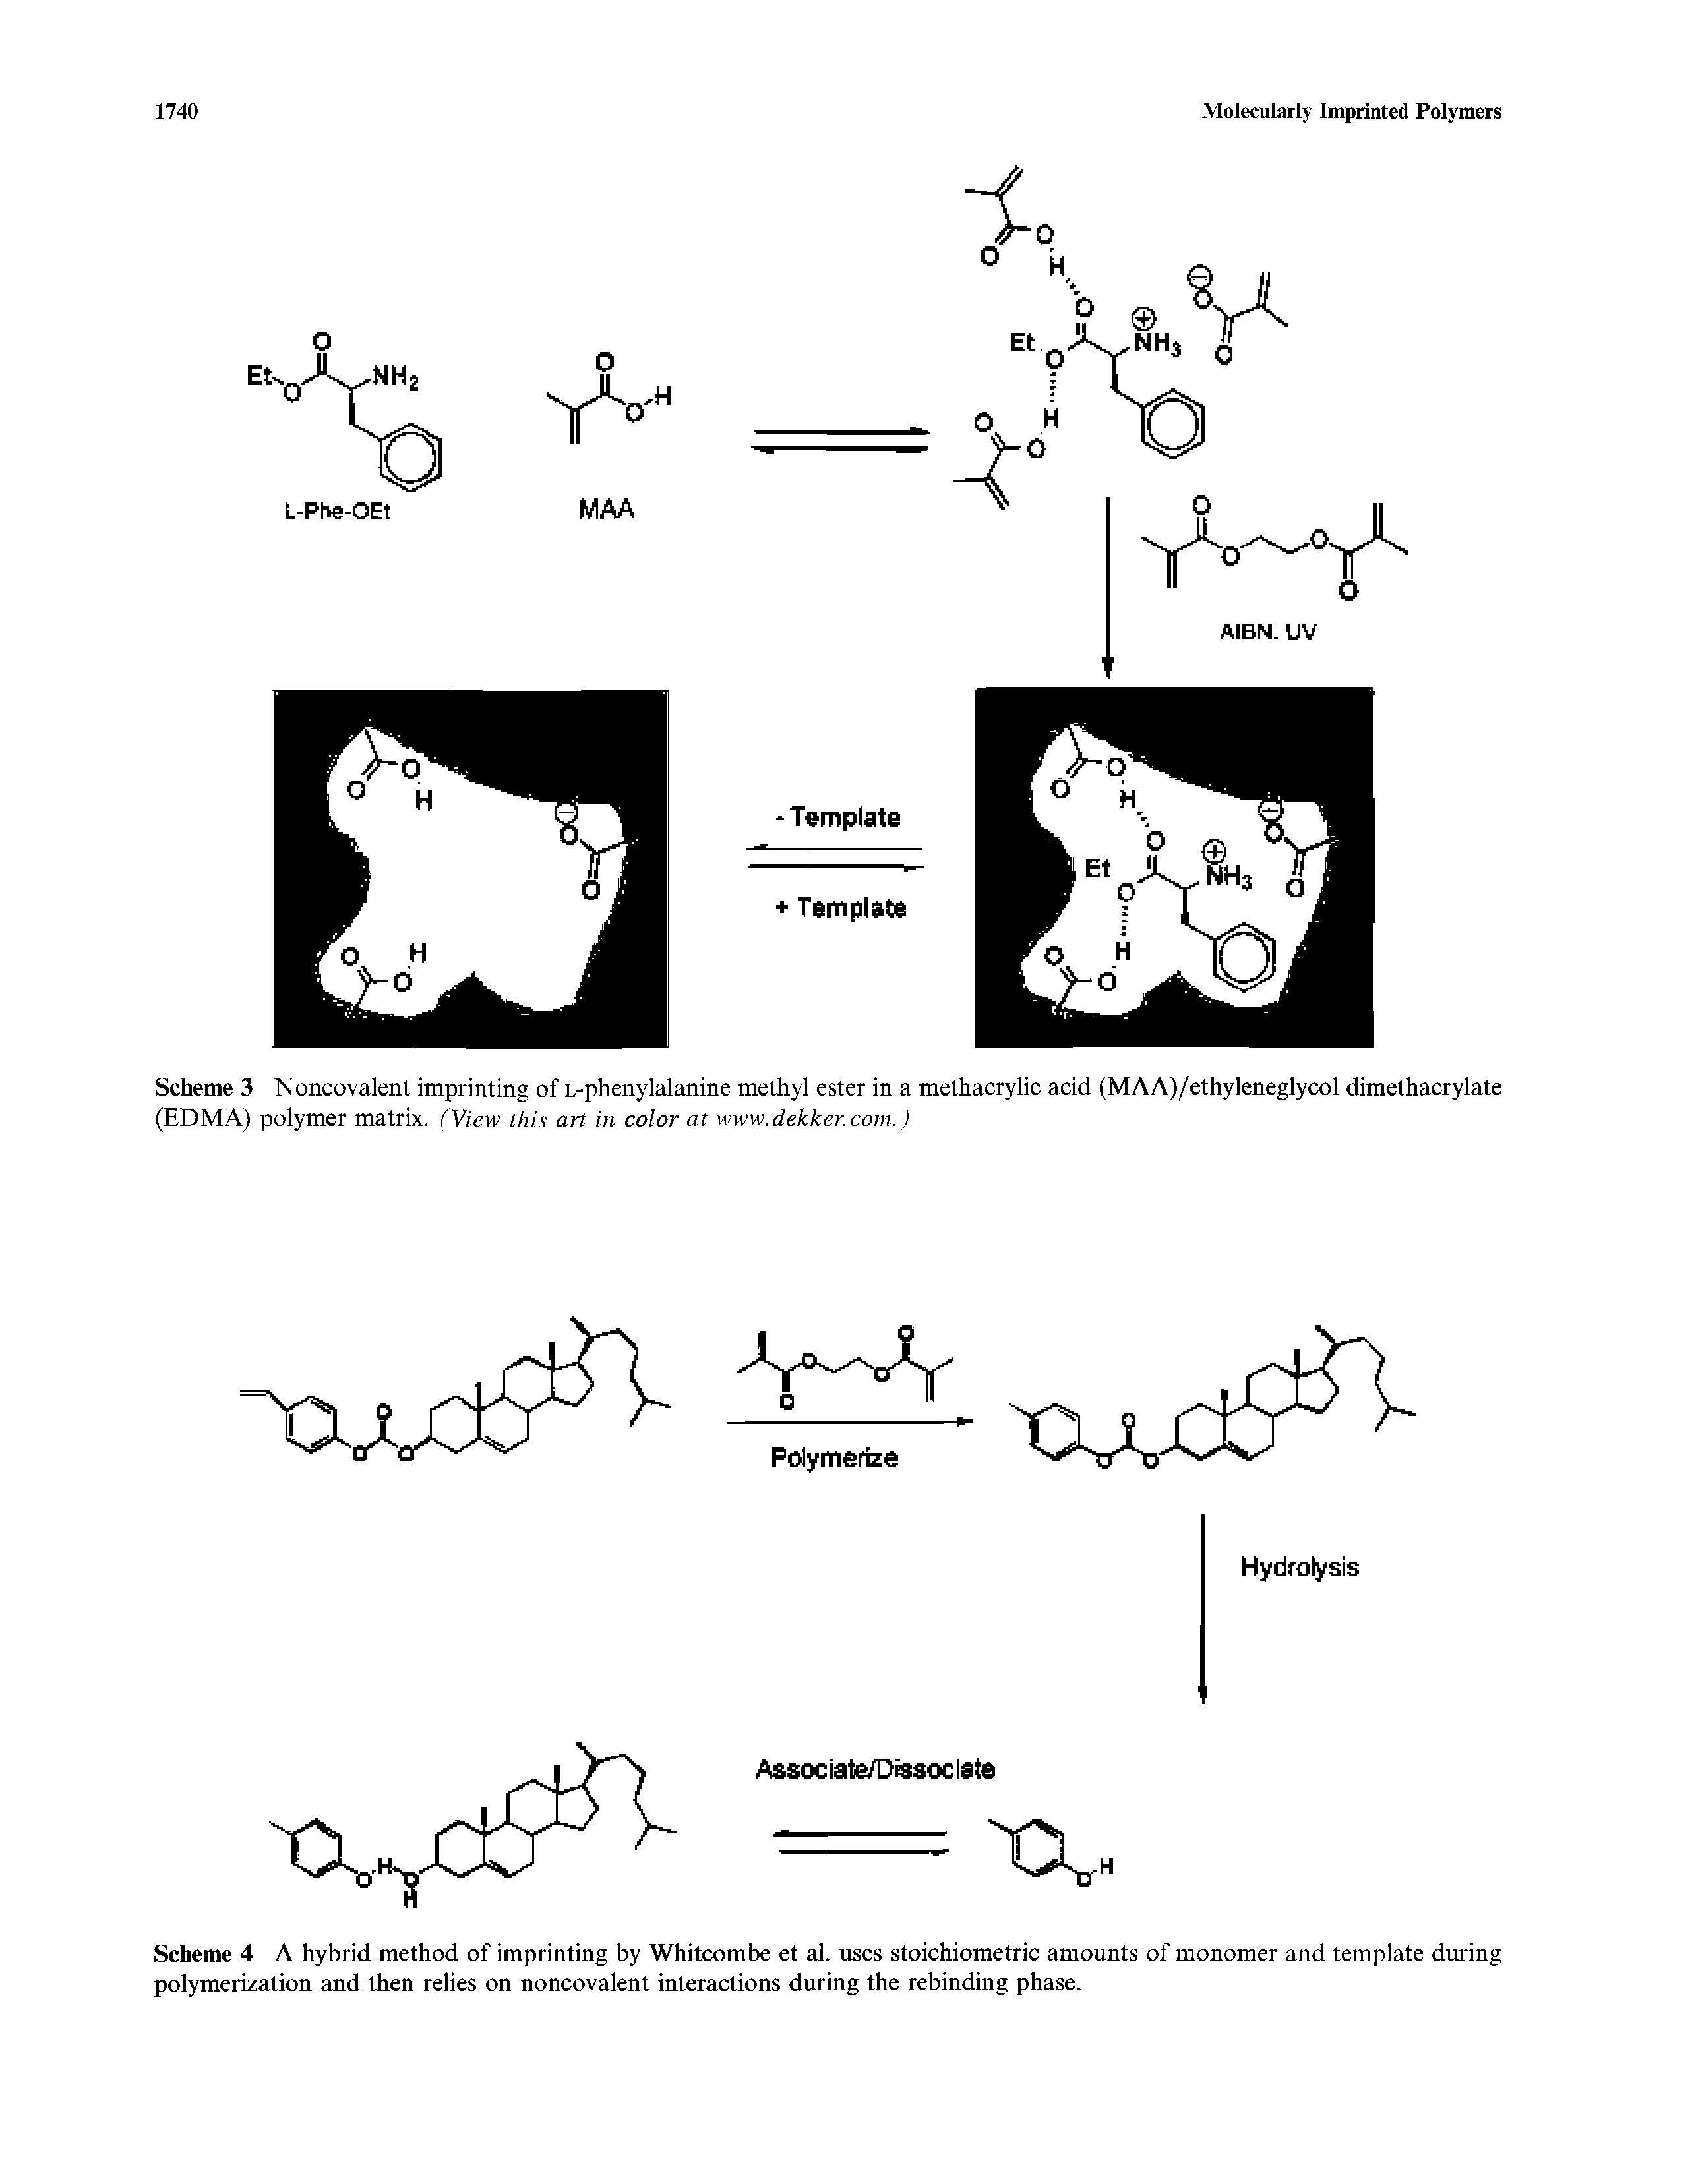 Scheme 3 Noncovalent imprinting of L-phenylalanine methyl ester in a methacrylic acid (MAA)/ethyleneglycol dimethacrylate (EDMA) polymer matrix. (View this art in color at www.dekker.com.)...